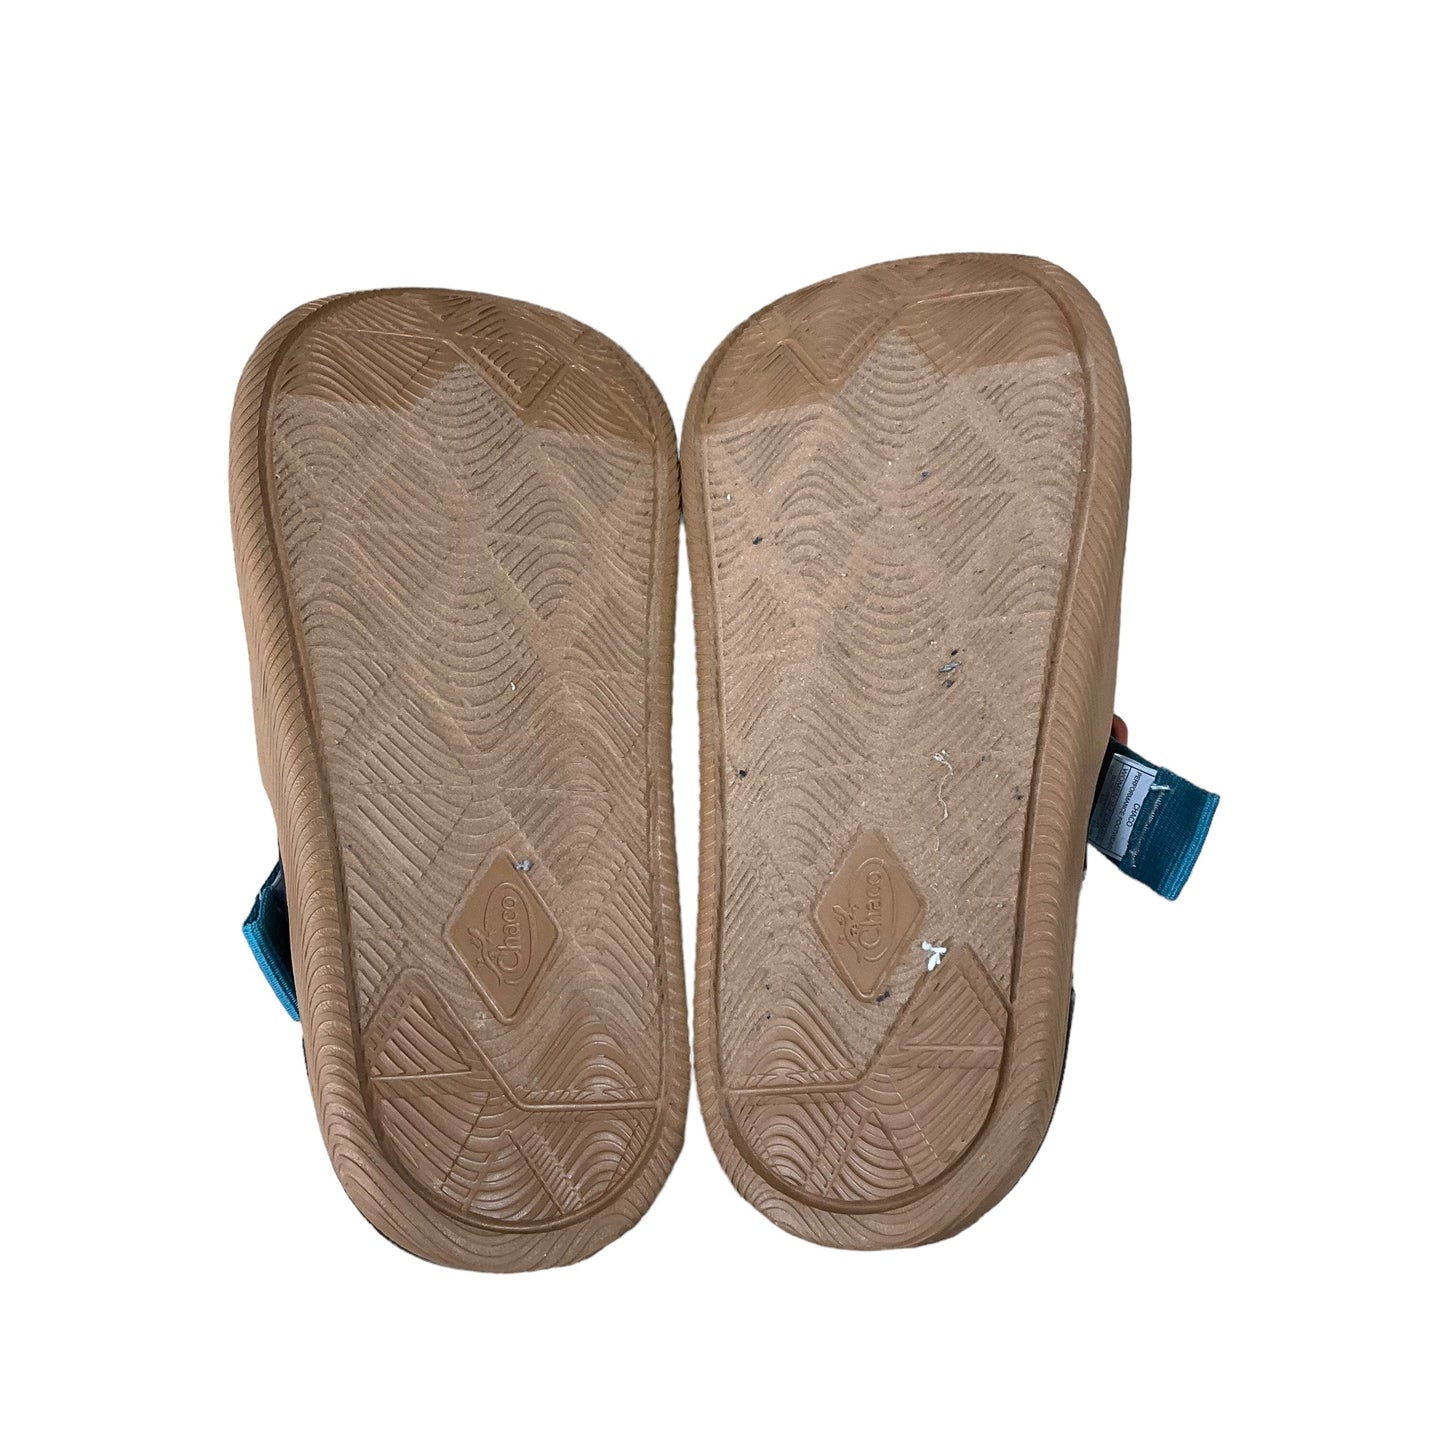 Blue & Brown Sandals Sport Chacos, Size 8